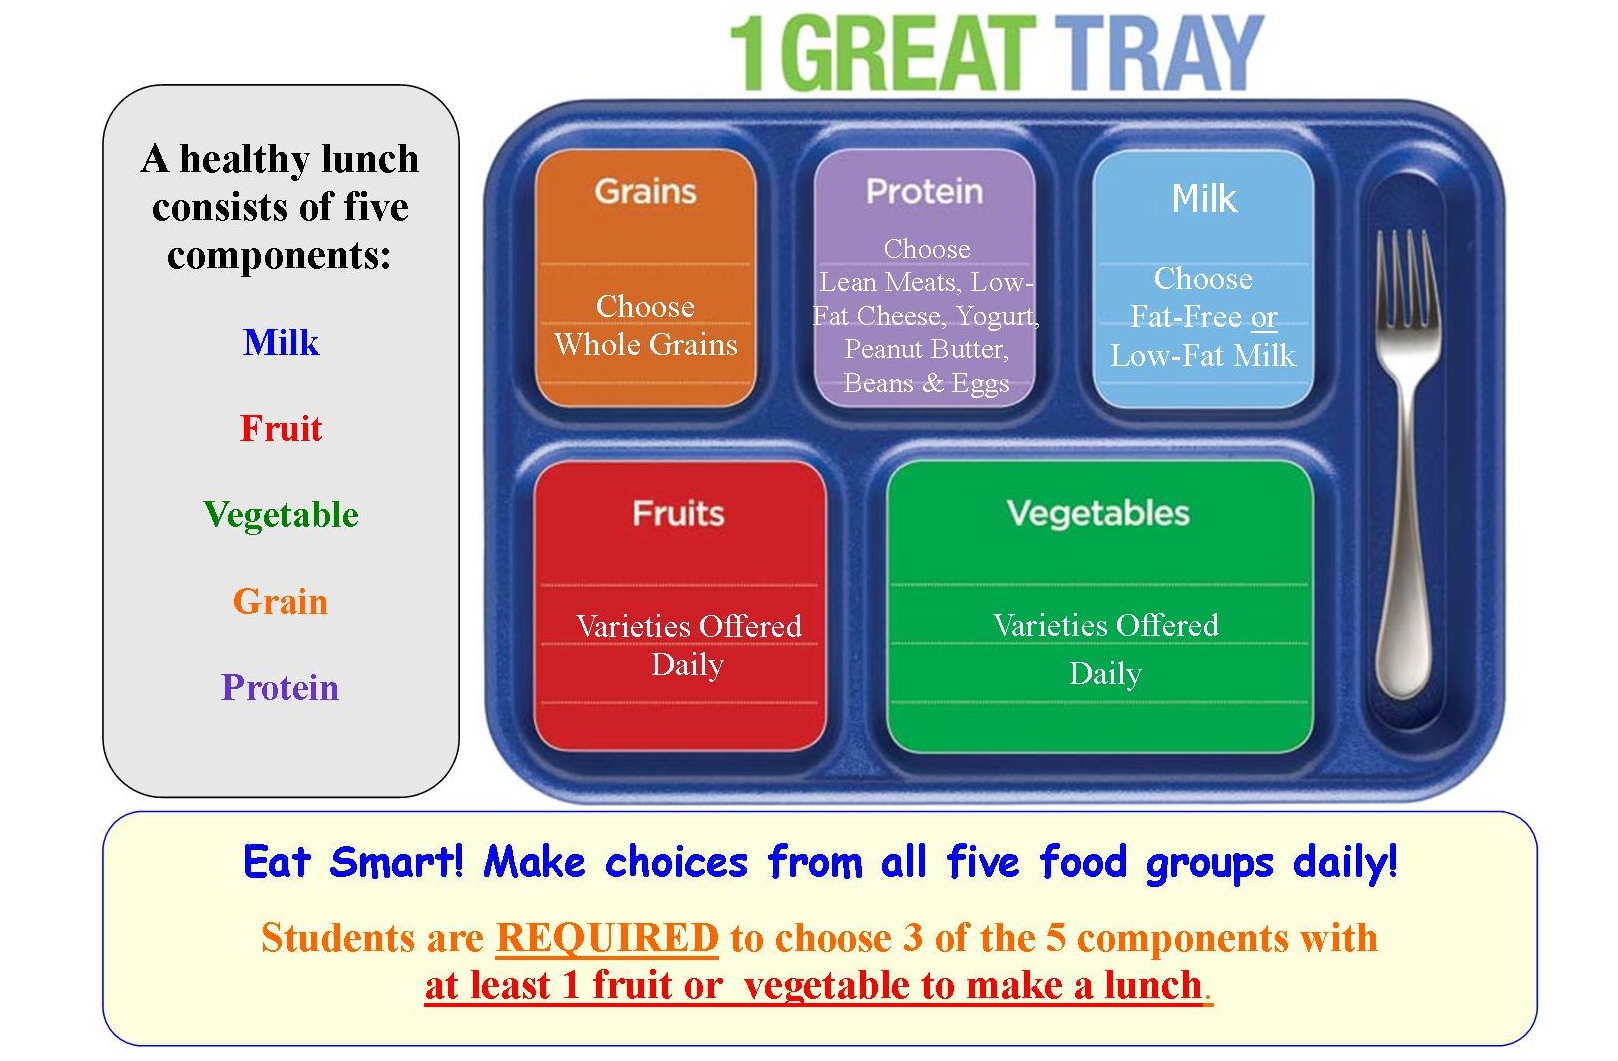 1 GREAT TRAY. A healthy lunch consists of five components: Milk, Fruit, Vegetable, Grain, and Protein. Grains: Choose Whole Grains. Protein: Choose Lean Meats, Low- Fat Cheese, Yogurt, Peanut Butter, and/or Beans & Eggs. Milk: Choose Fat-Free or Low-Fat Milk. Fruits: Varieties Offered Daily. Vegetables: Varieties Offered Daily. Eat Smart! Make choices from all five food groups daily! Students are REQUIRED to choose 3 of the 5 components with at least 1 fruit or vegetable to make a lunch.